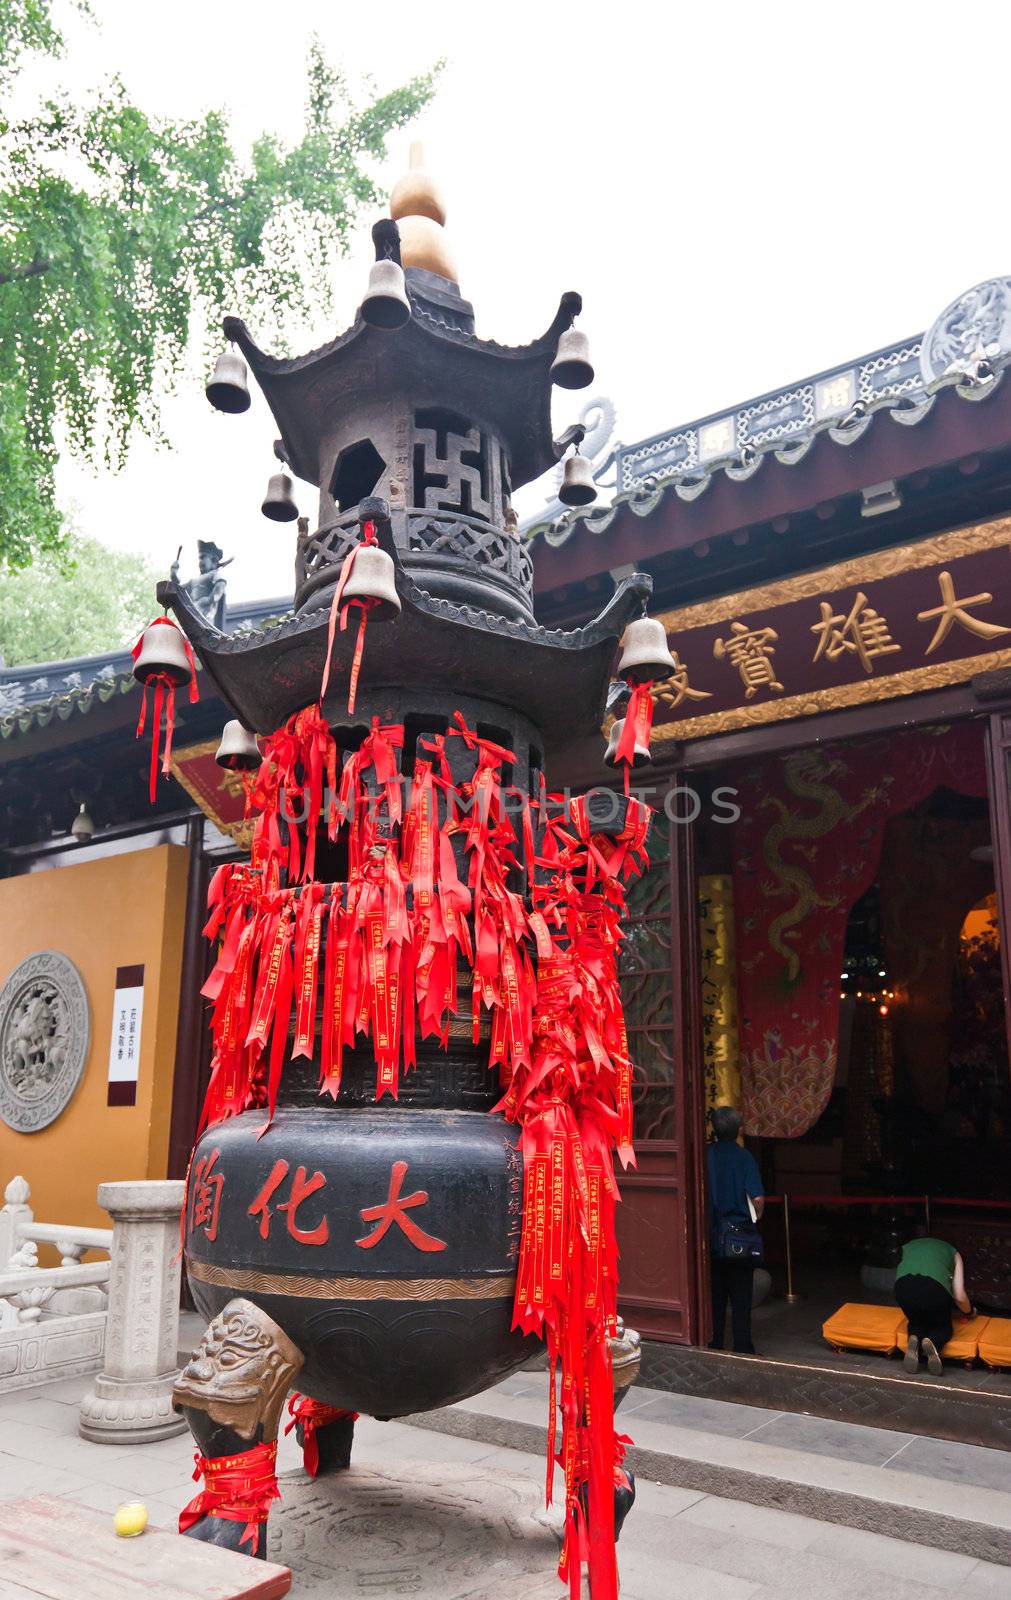 Han-Shan-Si Temple famous in the bell sound in Suzhou city China
